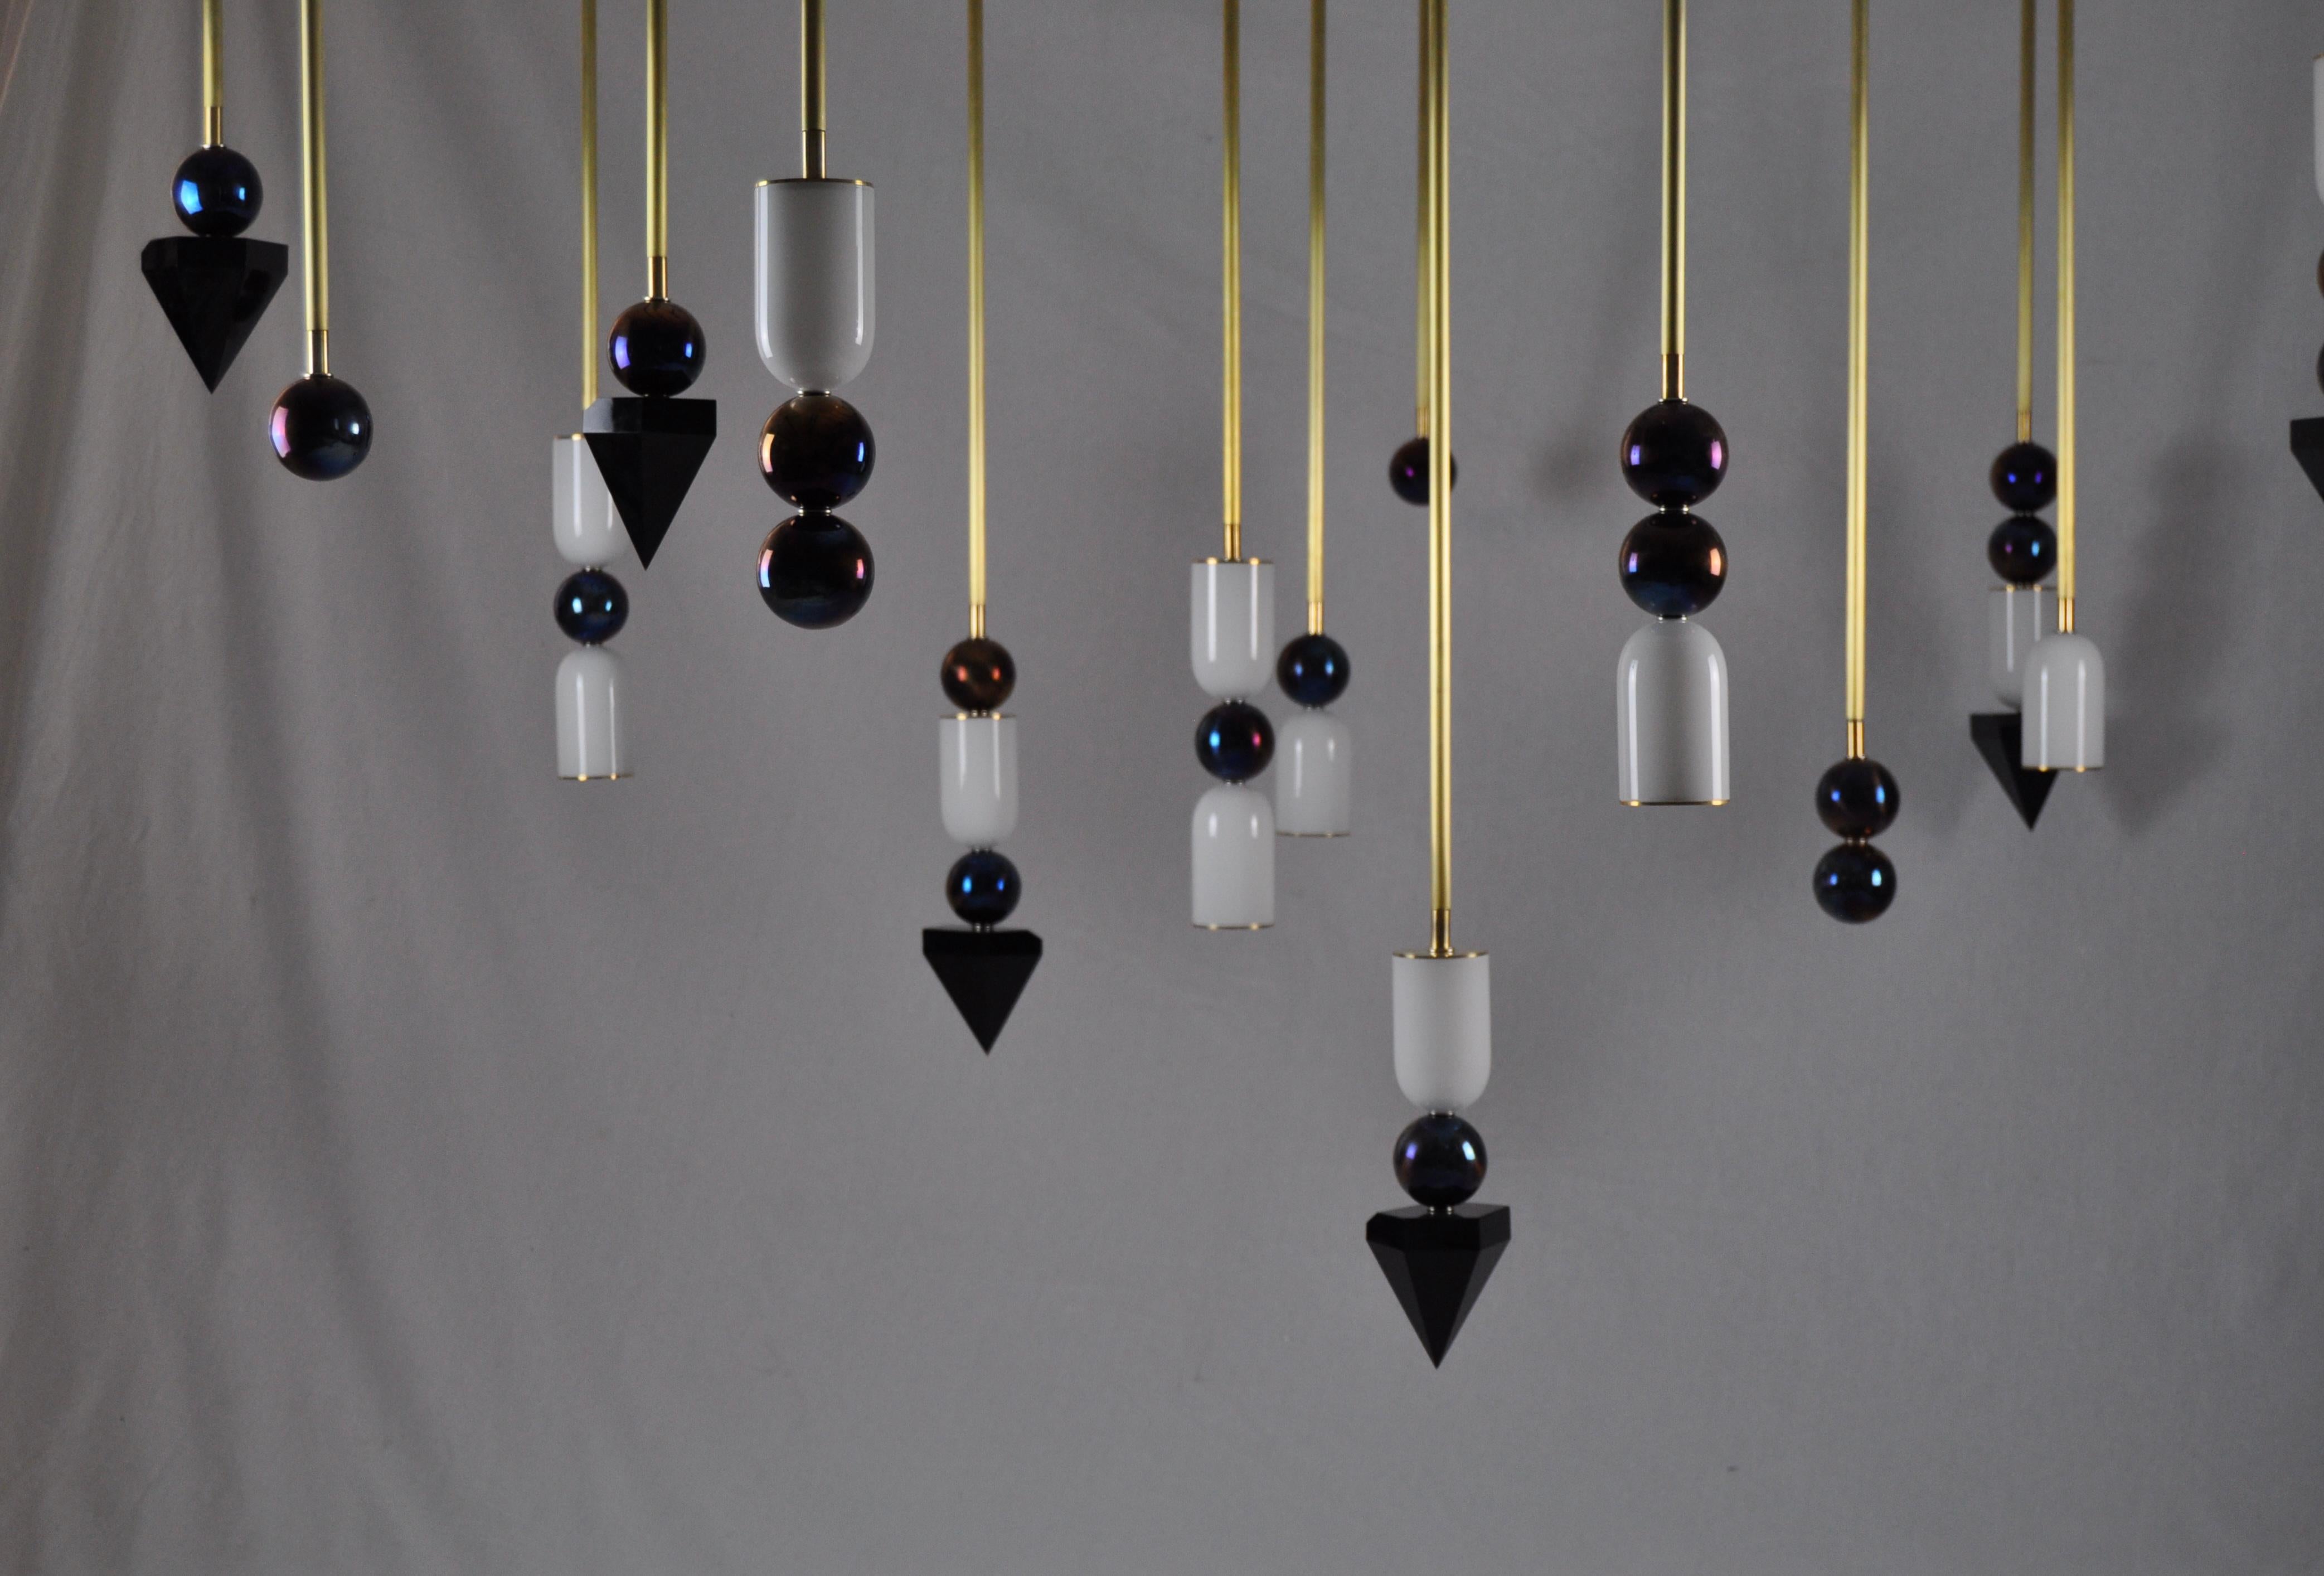 Inspired by the three states of matter, Laur combines semi-precious elements of brass, onyx, and hand blown white glass in playful interconnecting arrangements, some with functional LED light and others in complementary ornamental configurations.